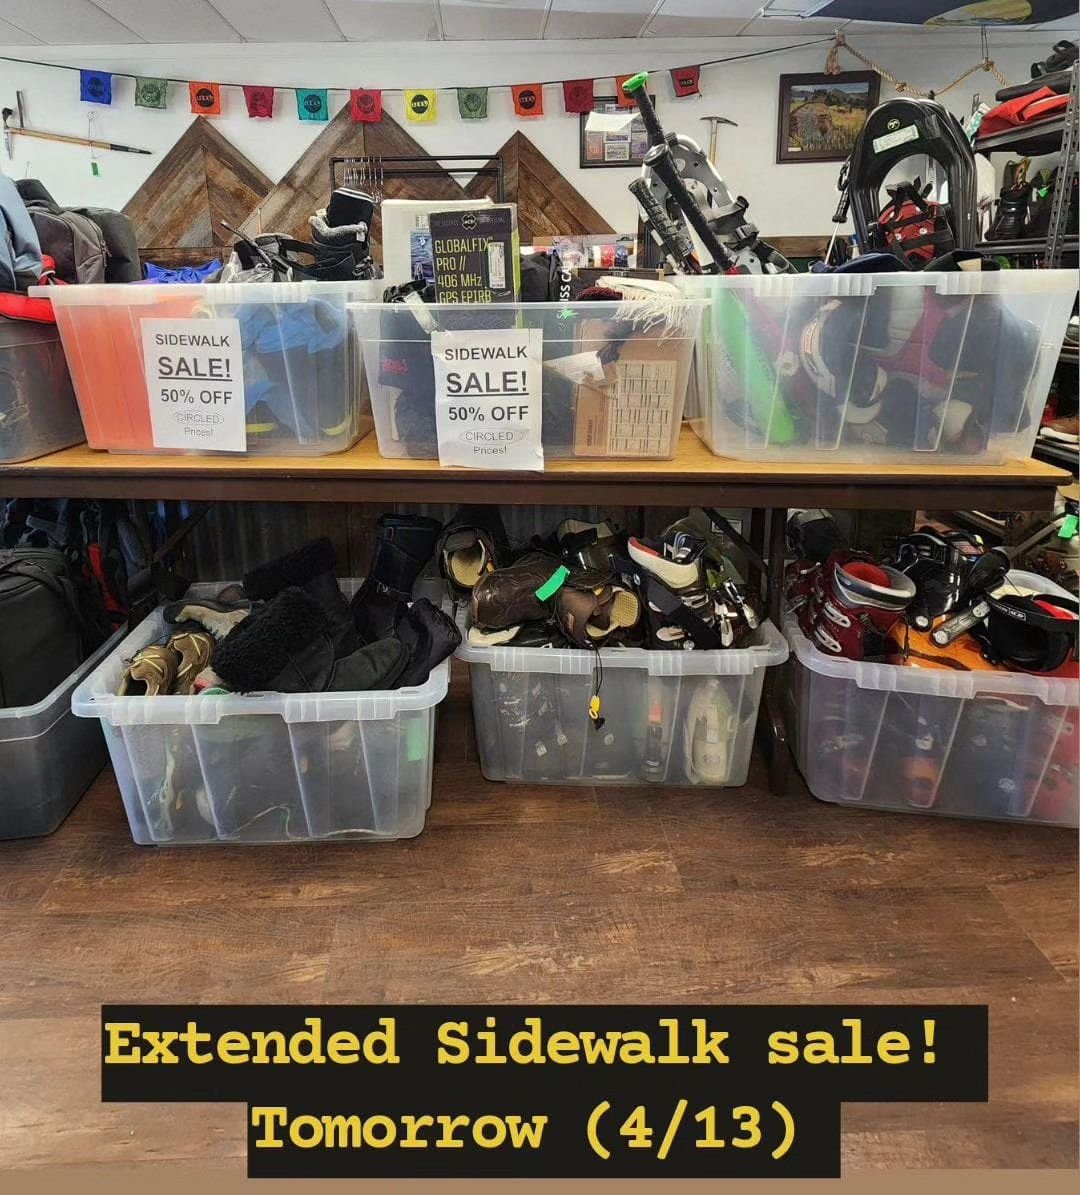 The wind was so strong last week it blew our sale into this weekend! Last chance to get 50% off all circled prices.

#fortcollins #fortcollinscolorado #lovelandcolorado #windsorcolorado #noco #csu #coloradostateuniversity #consignment #smallbusiness 